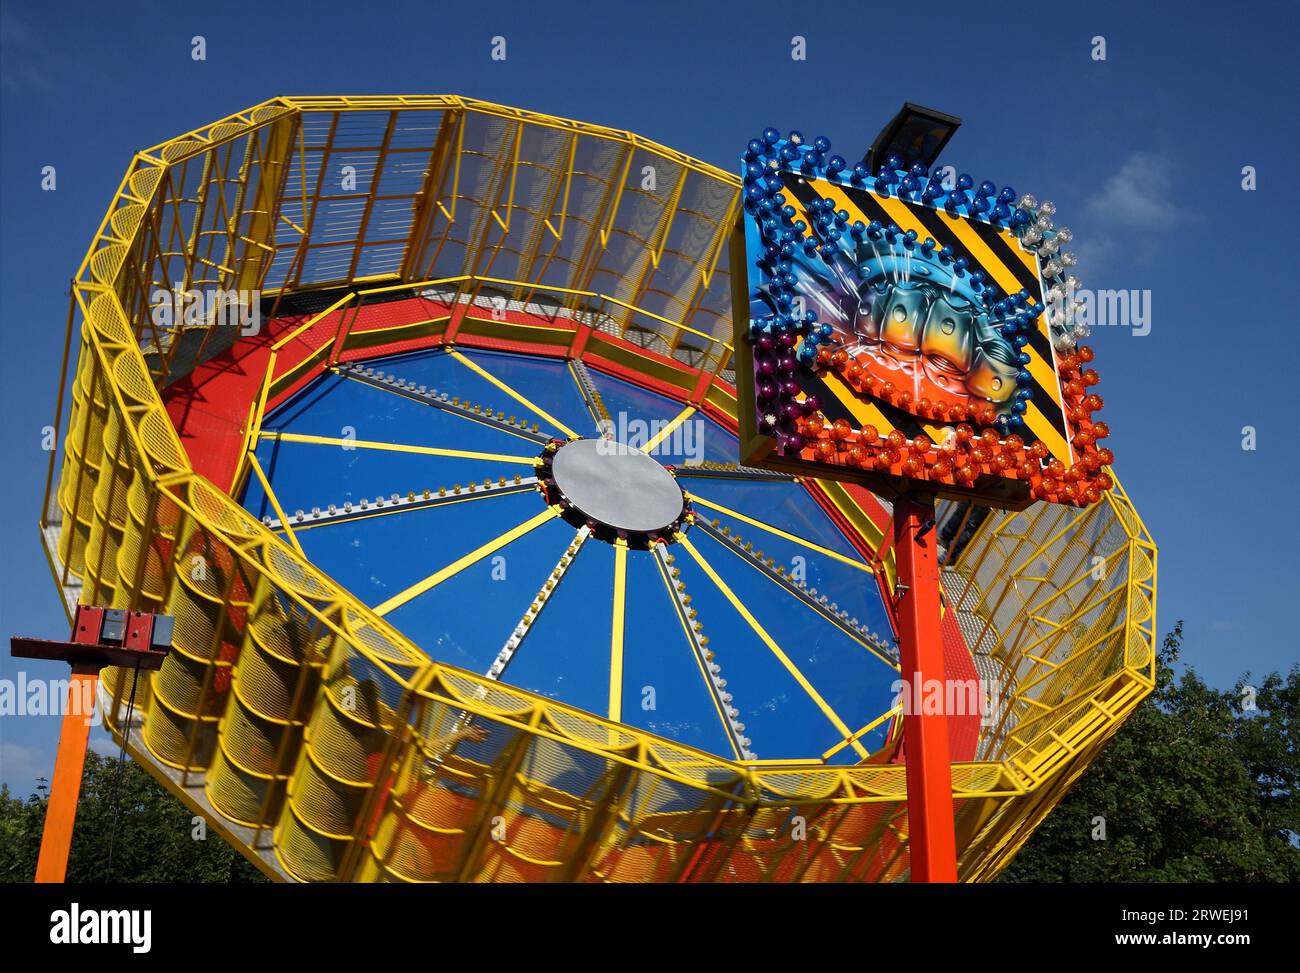 Colourful rotating carousel in full swing, background blue sky Stock Photo